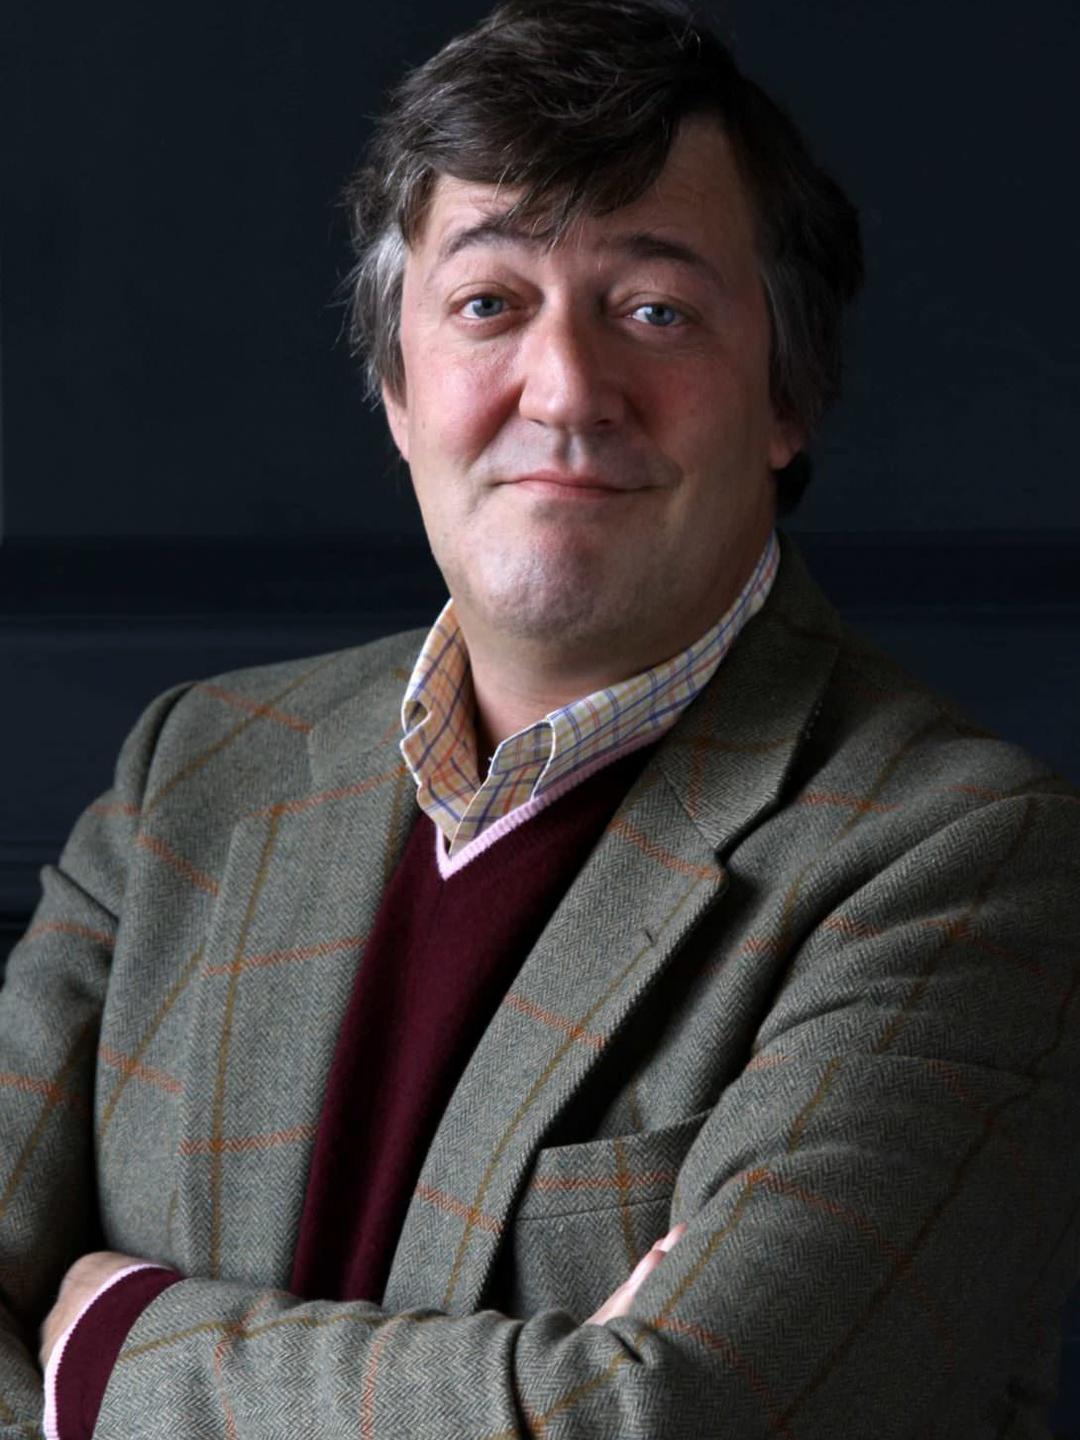 Stephen Fry personal traits